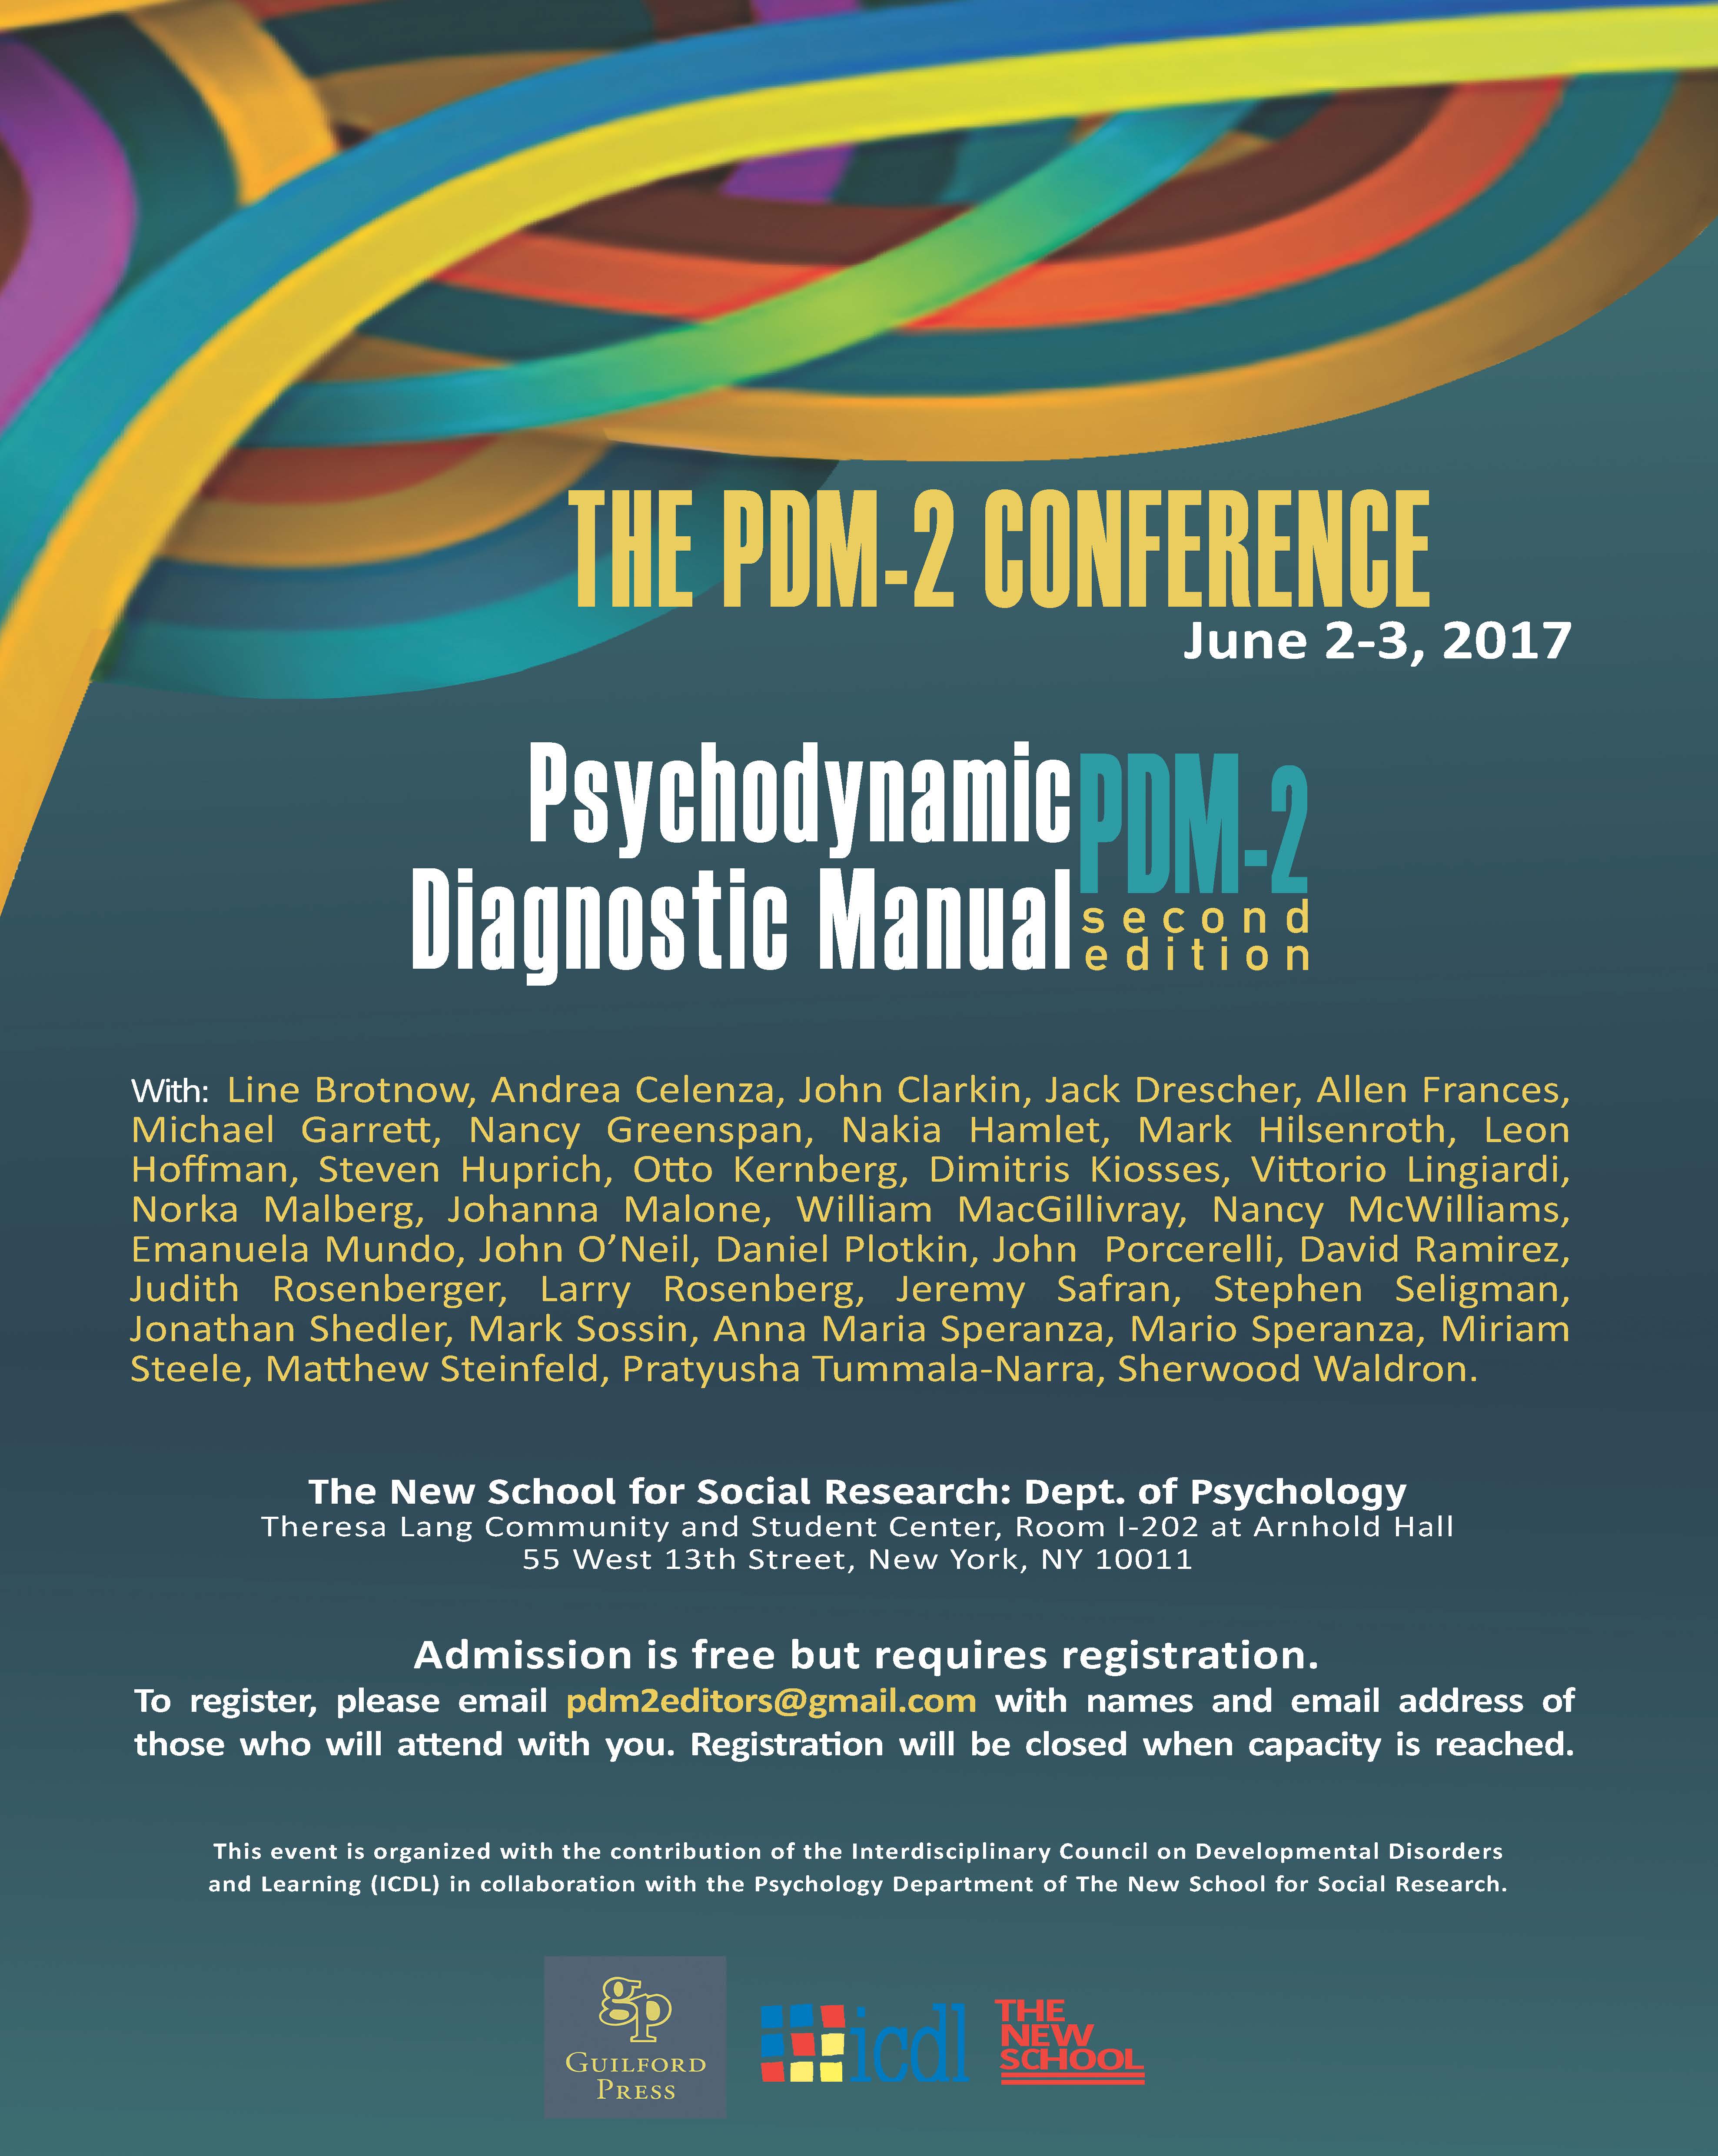 THE PDM-2 CONFERENCE